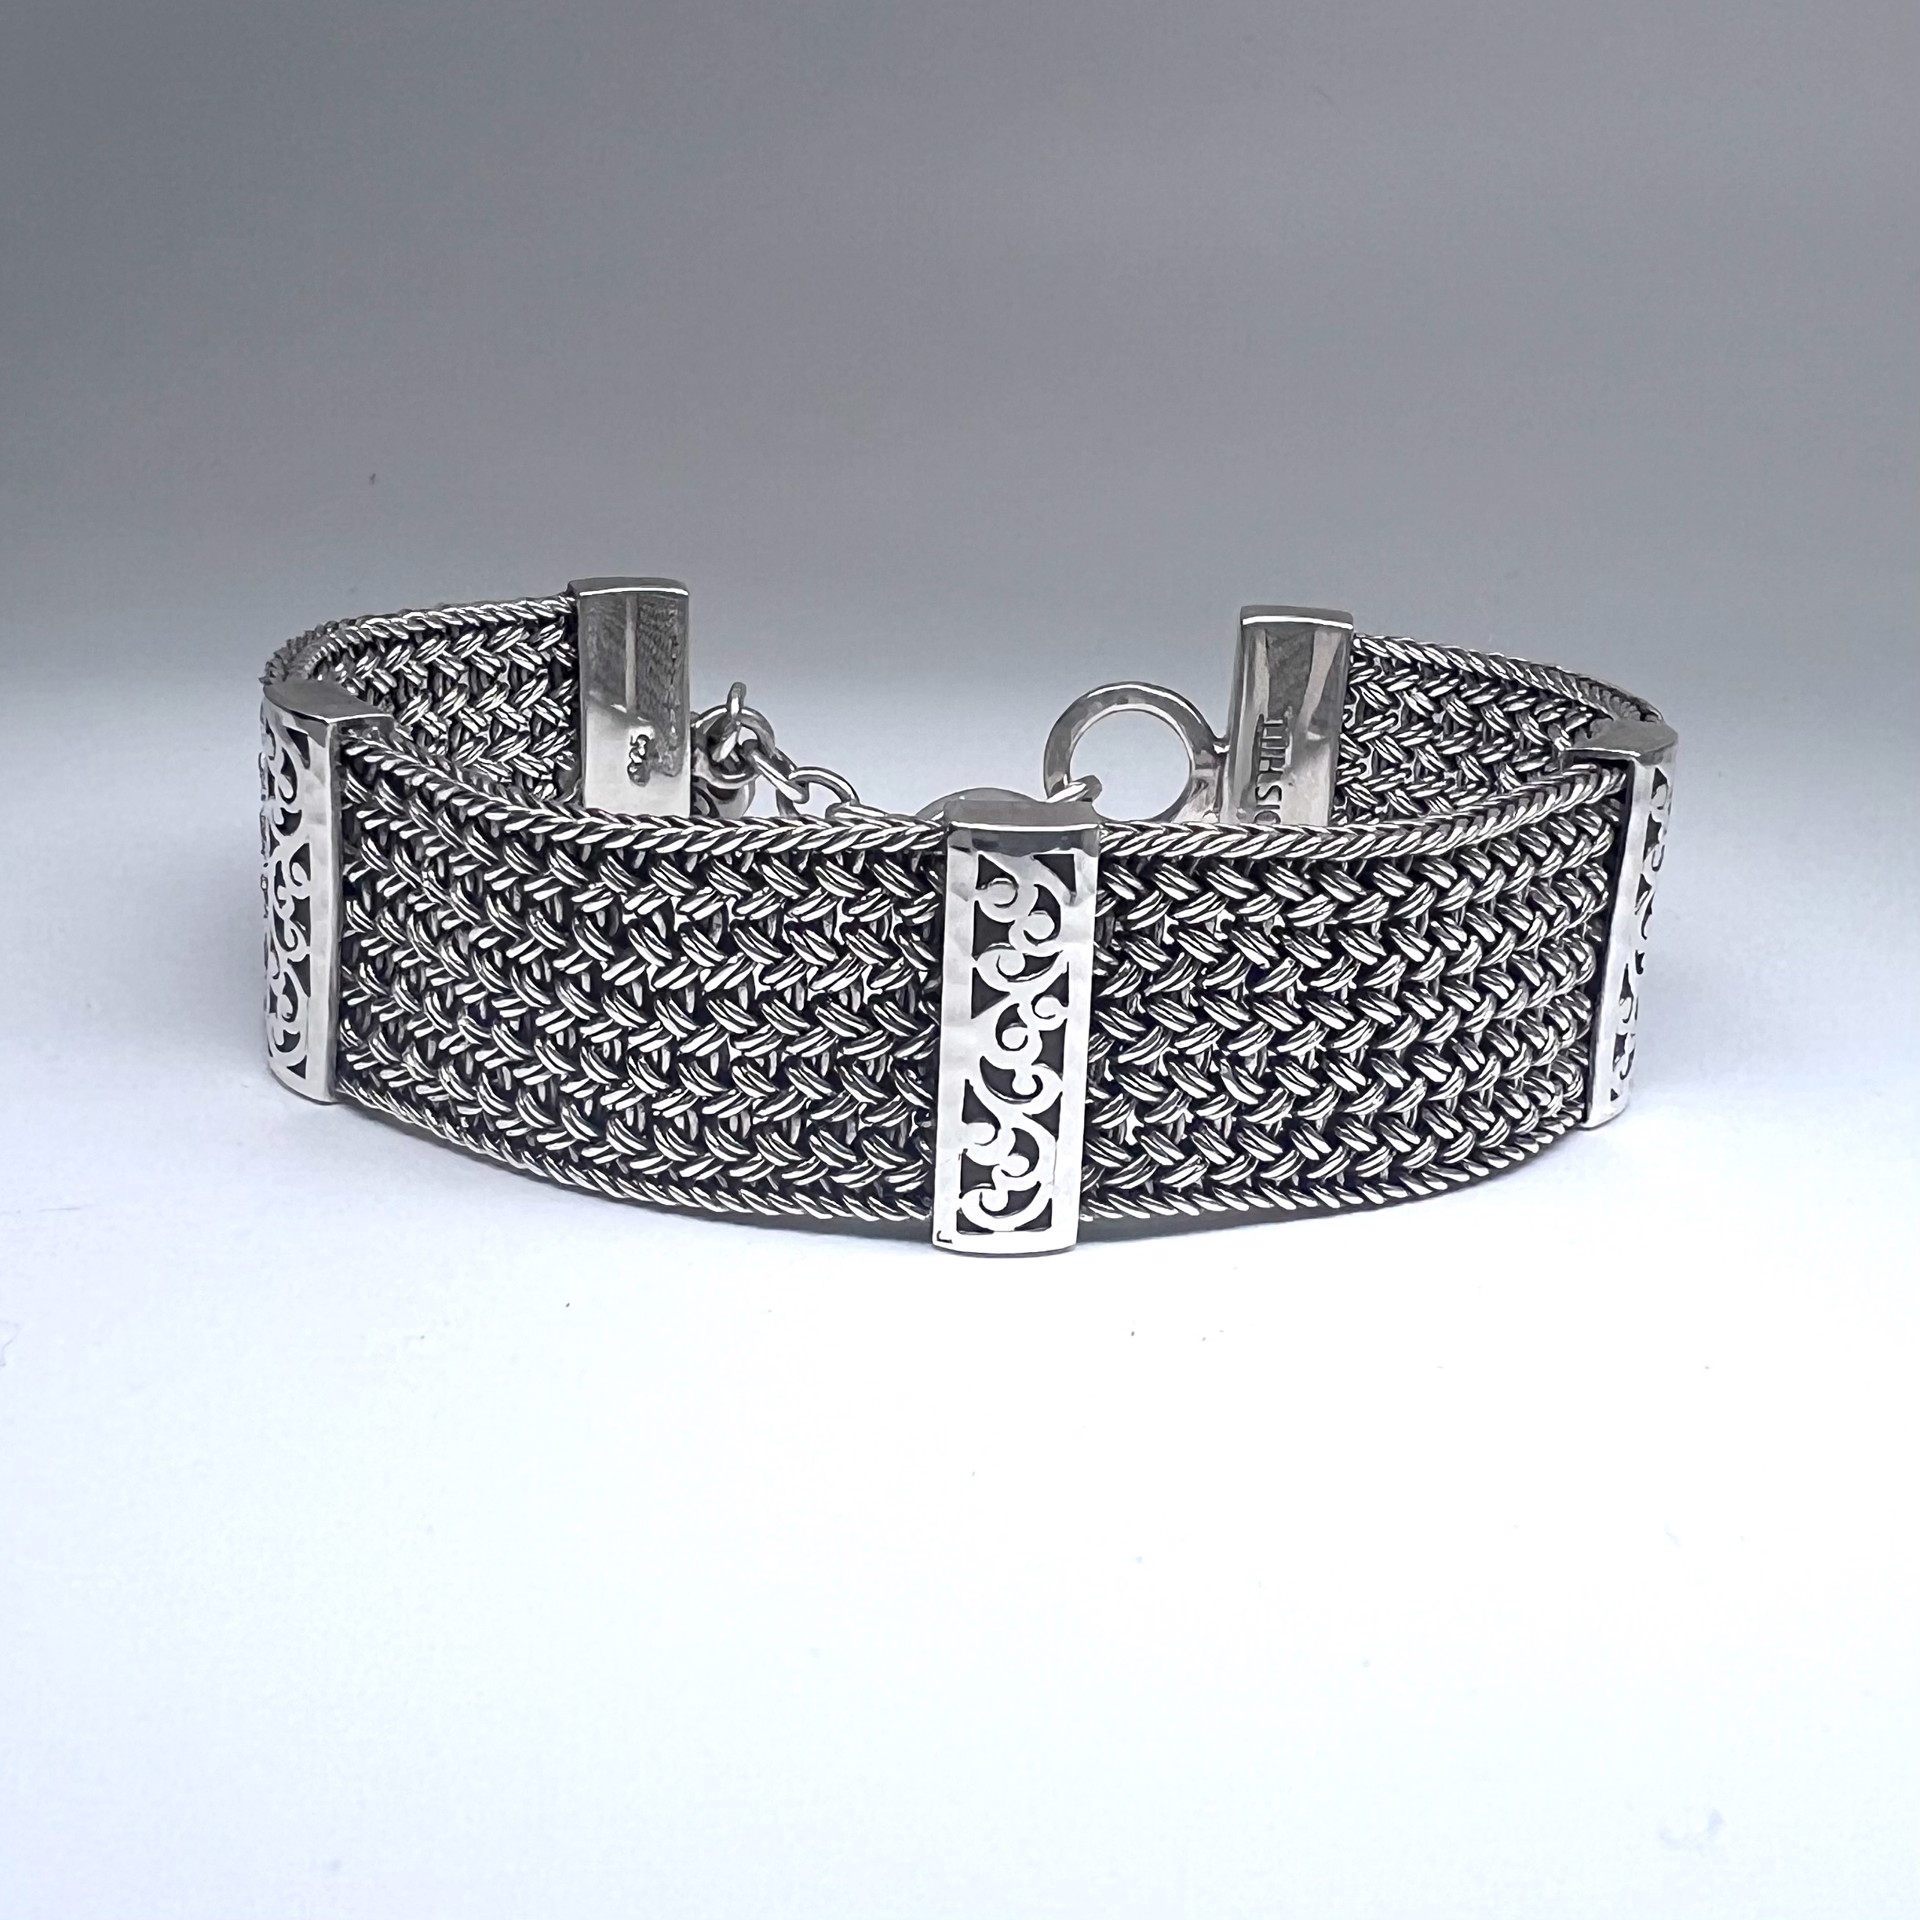 1208 Intricate Hand Carved Woven Bracelet by Lois Hill